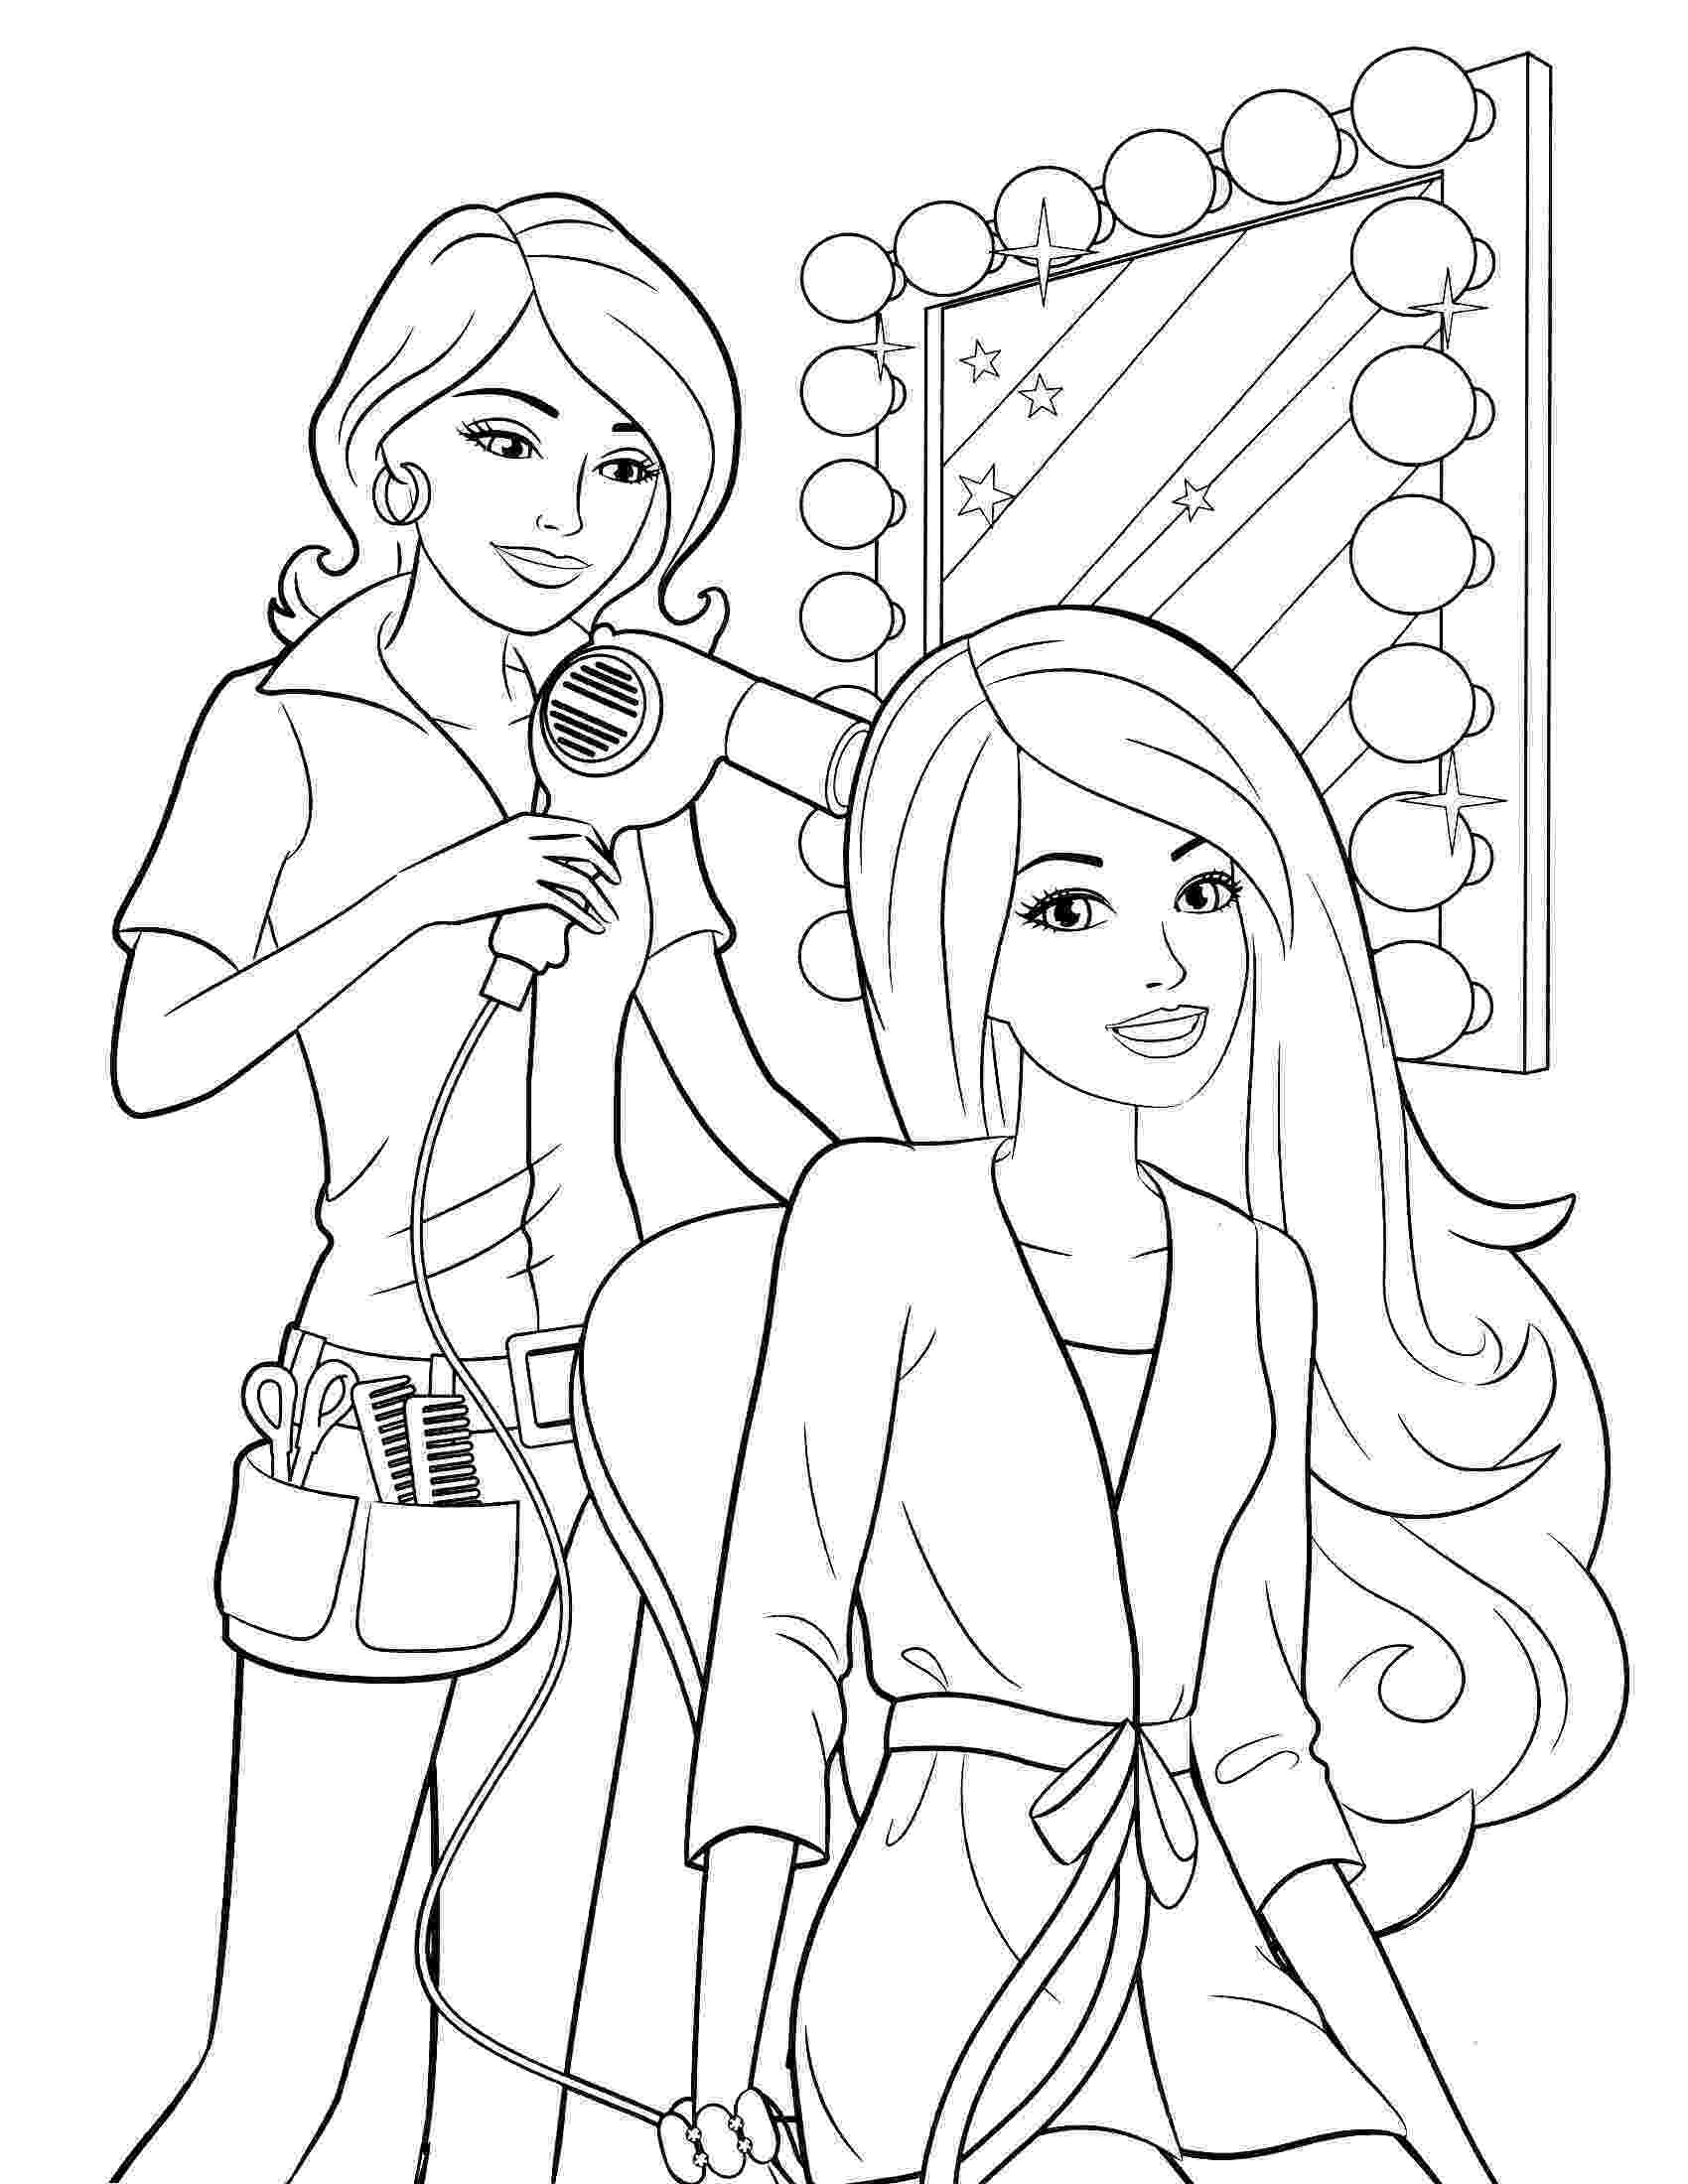 girl pictures to color and print equestria girls coloring pages best coloring pages for kids print color and pictures girl to 